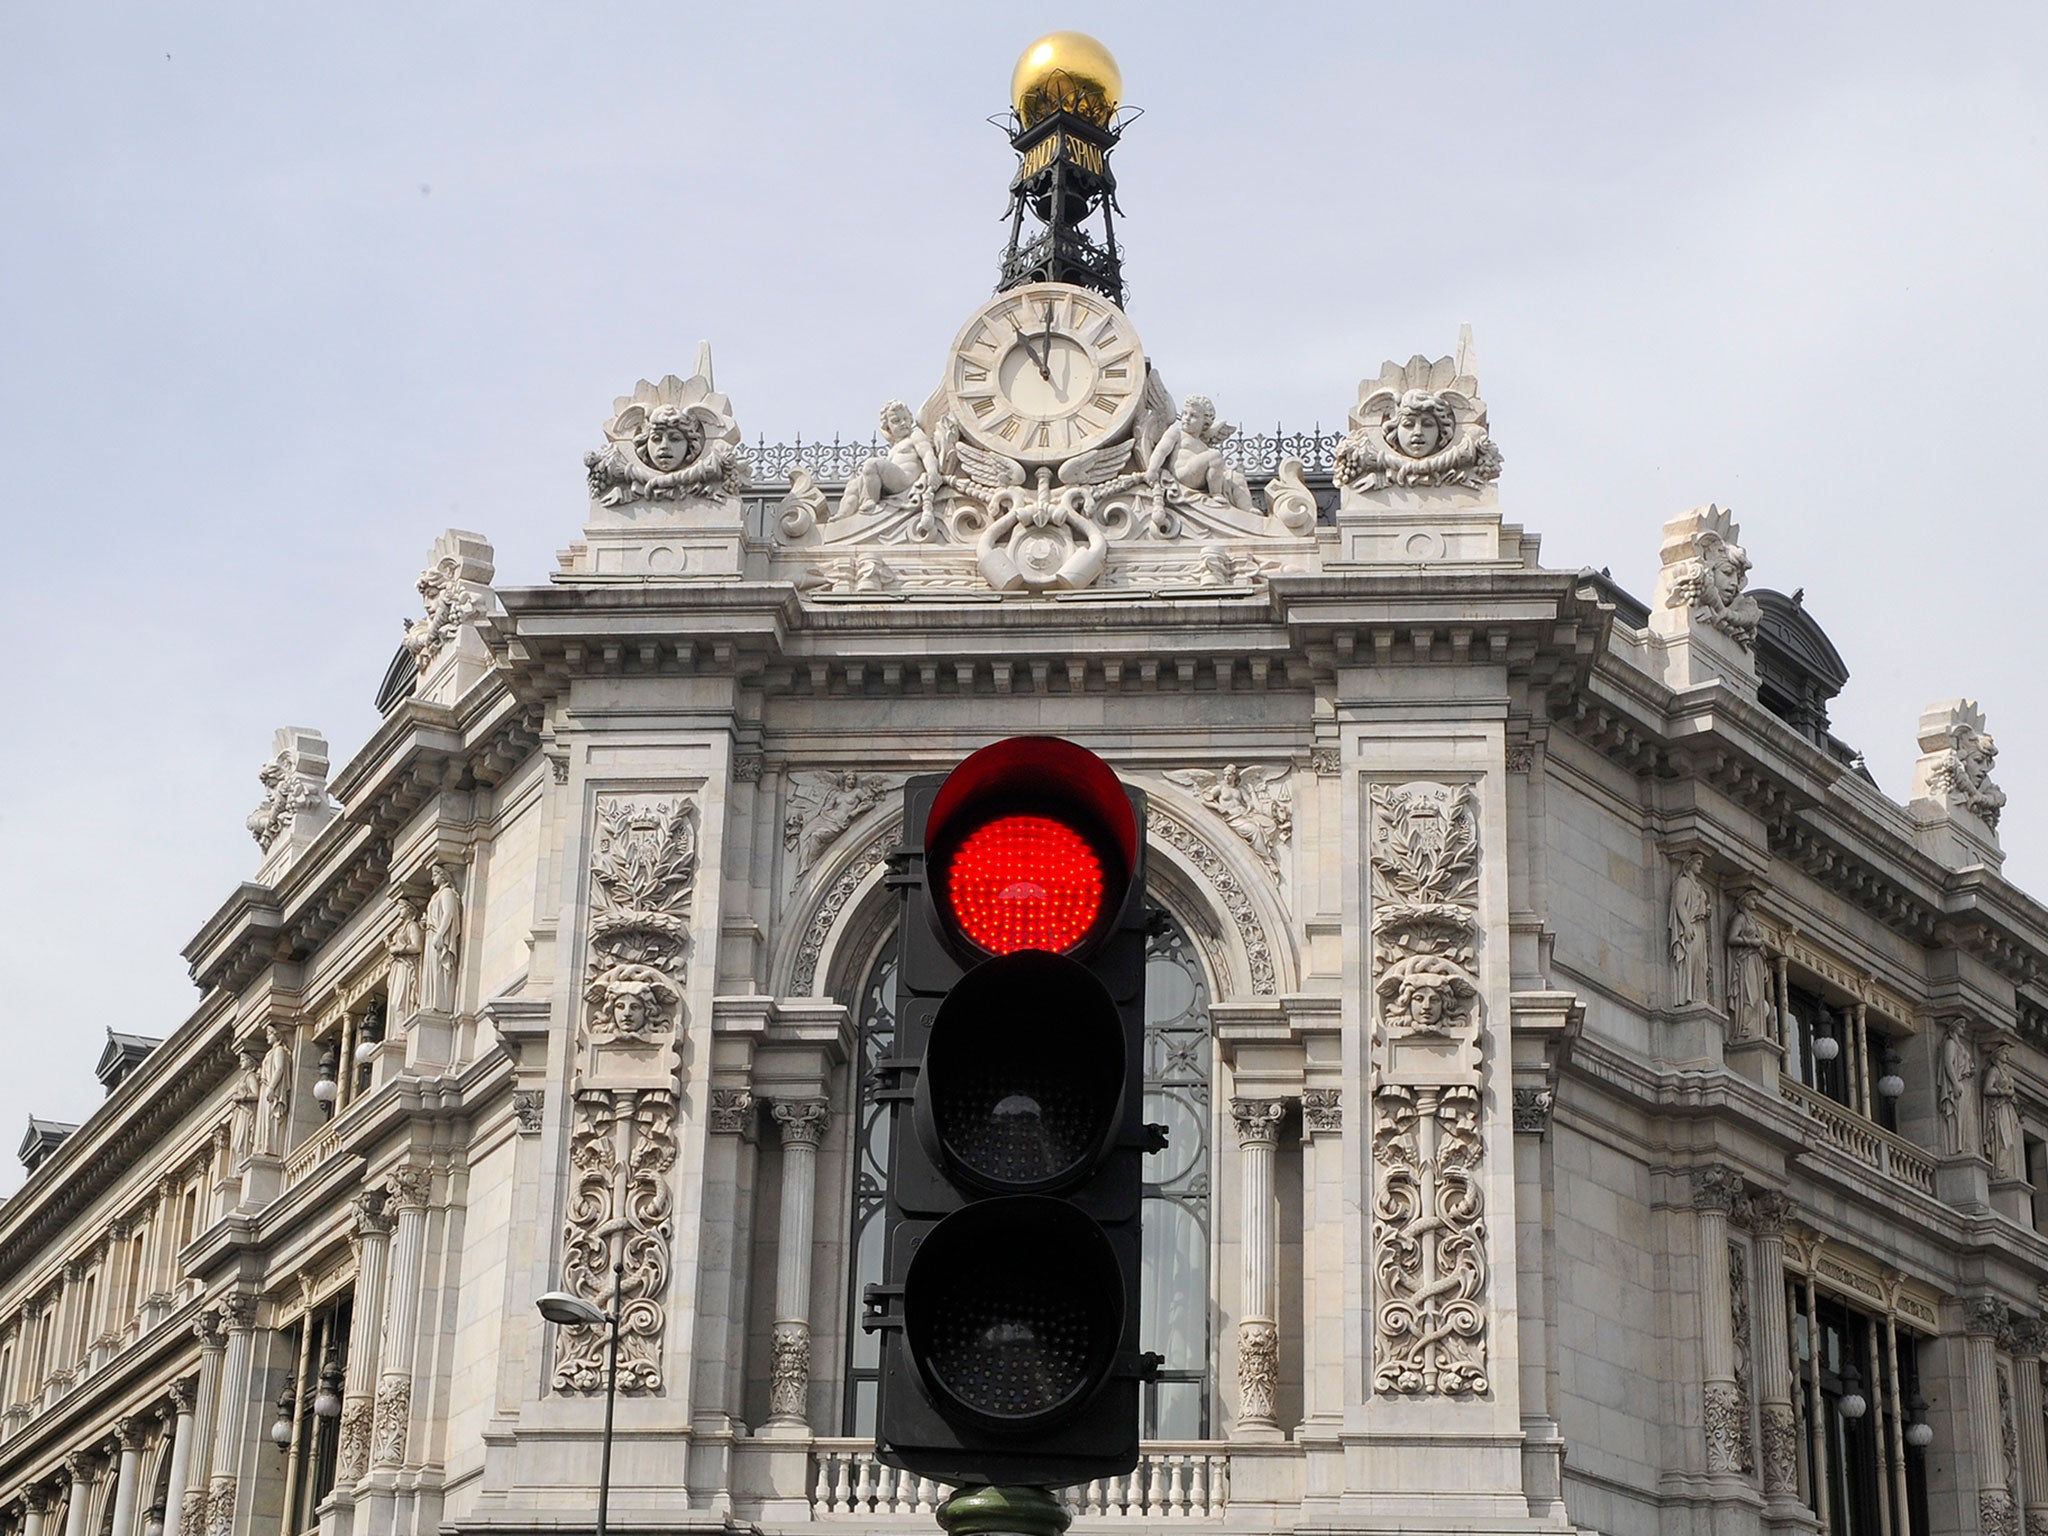 The first traffic light was erected 101 years ago